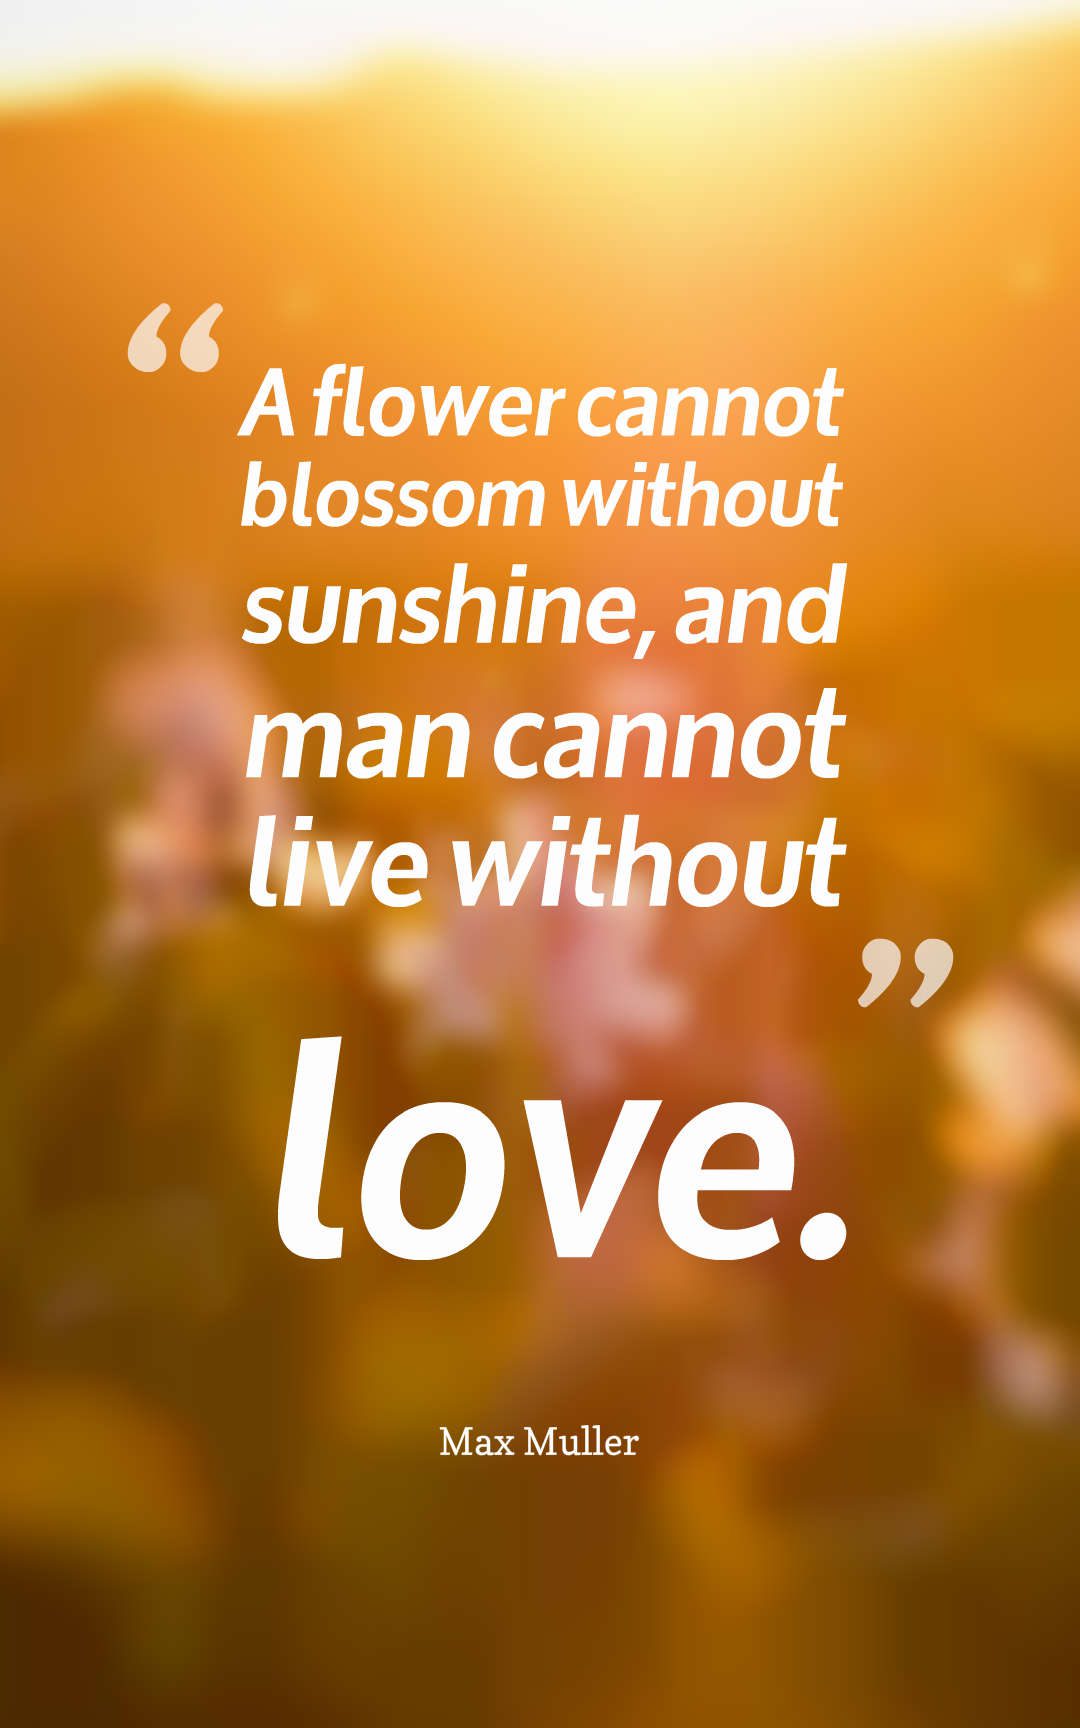 A flower cannot blossom without sunshine, and man cannot live without love.